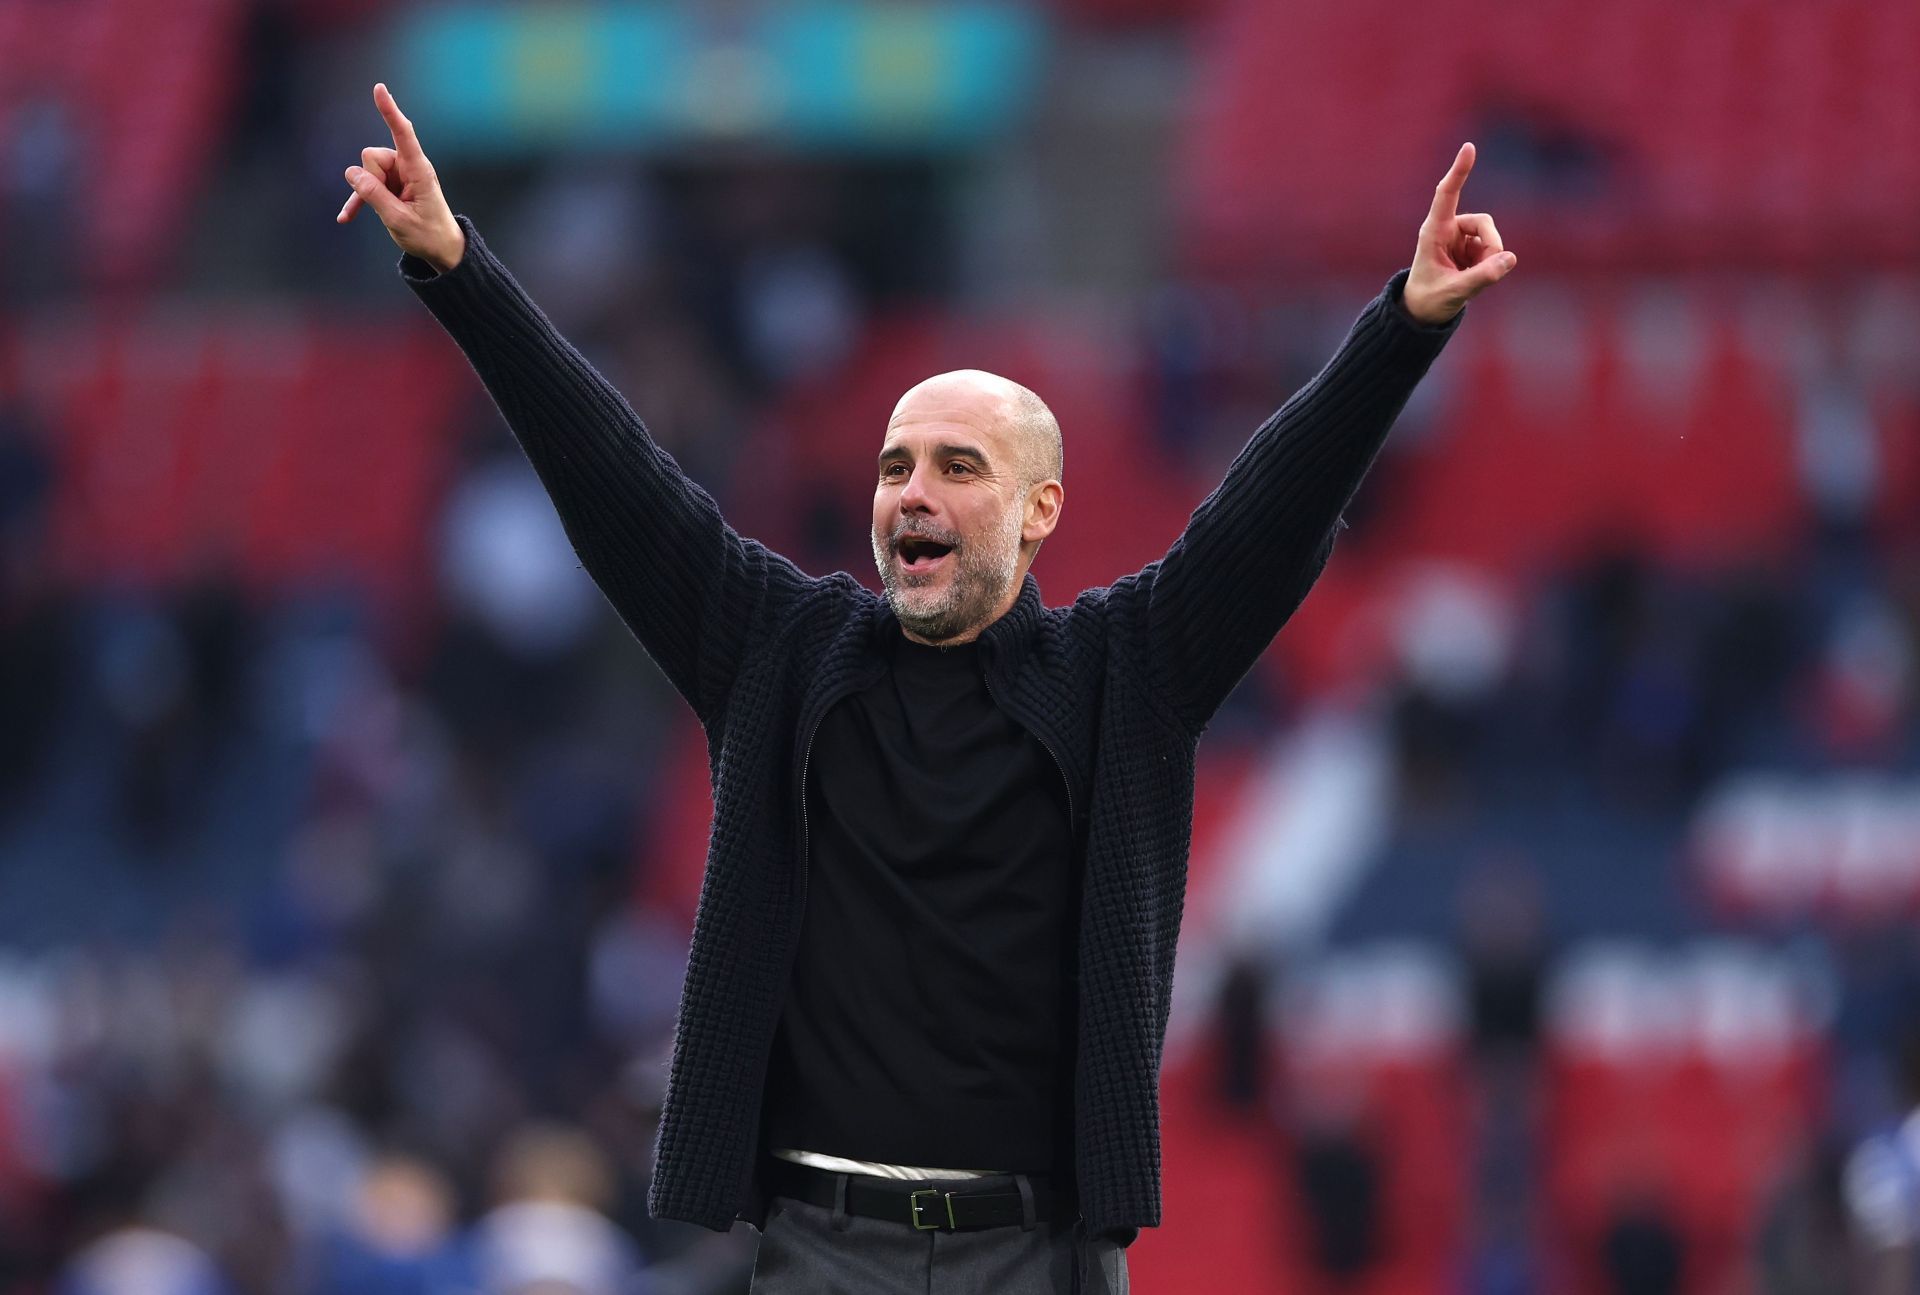 Guardiola is on the cusp of steering his team to Premier League glory once again.